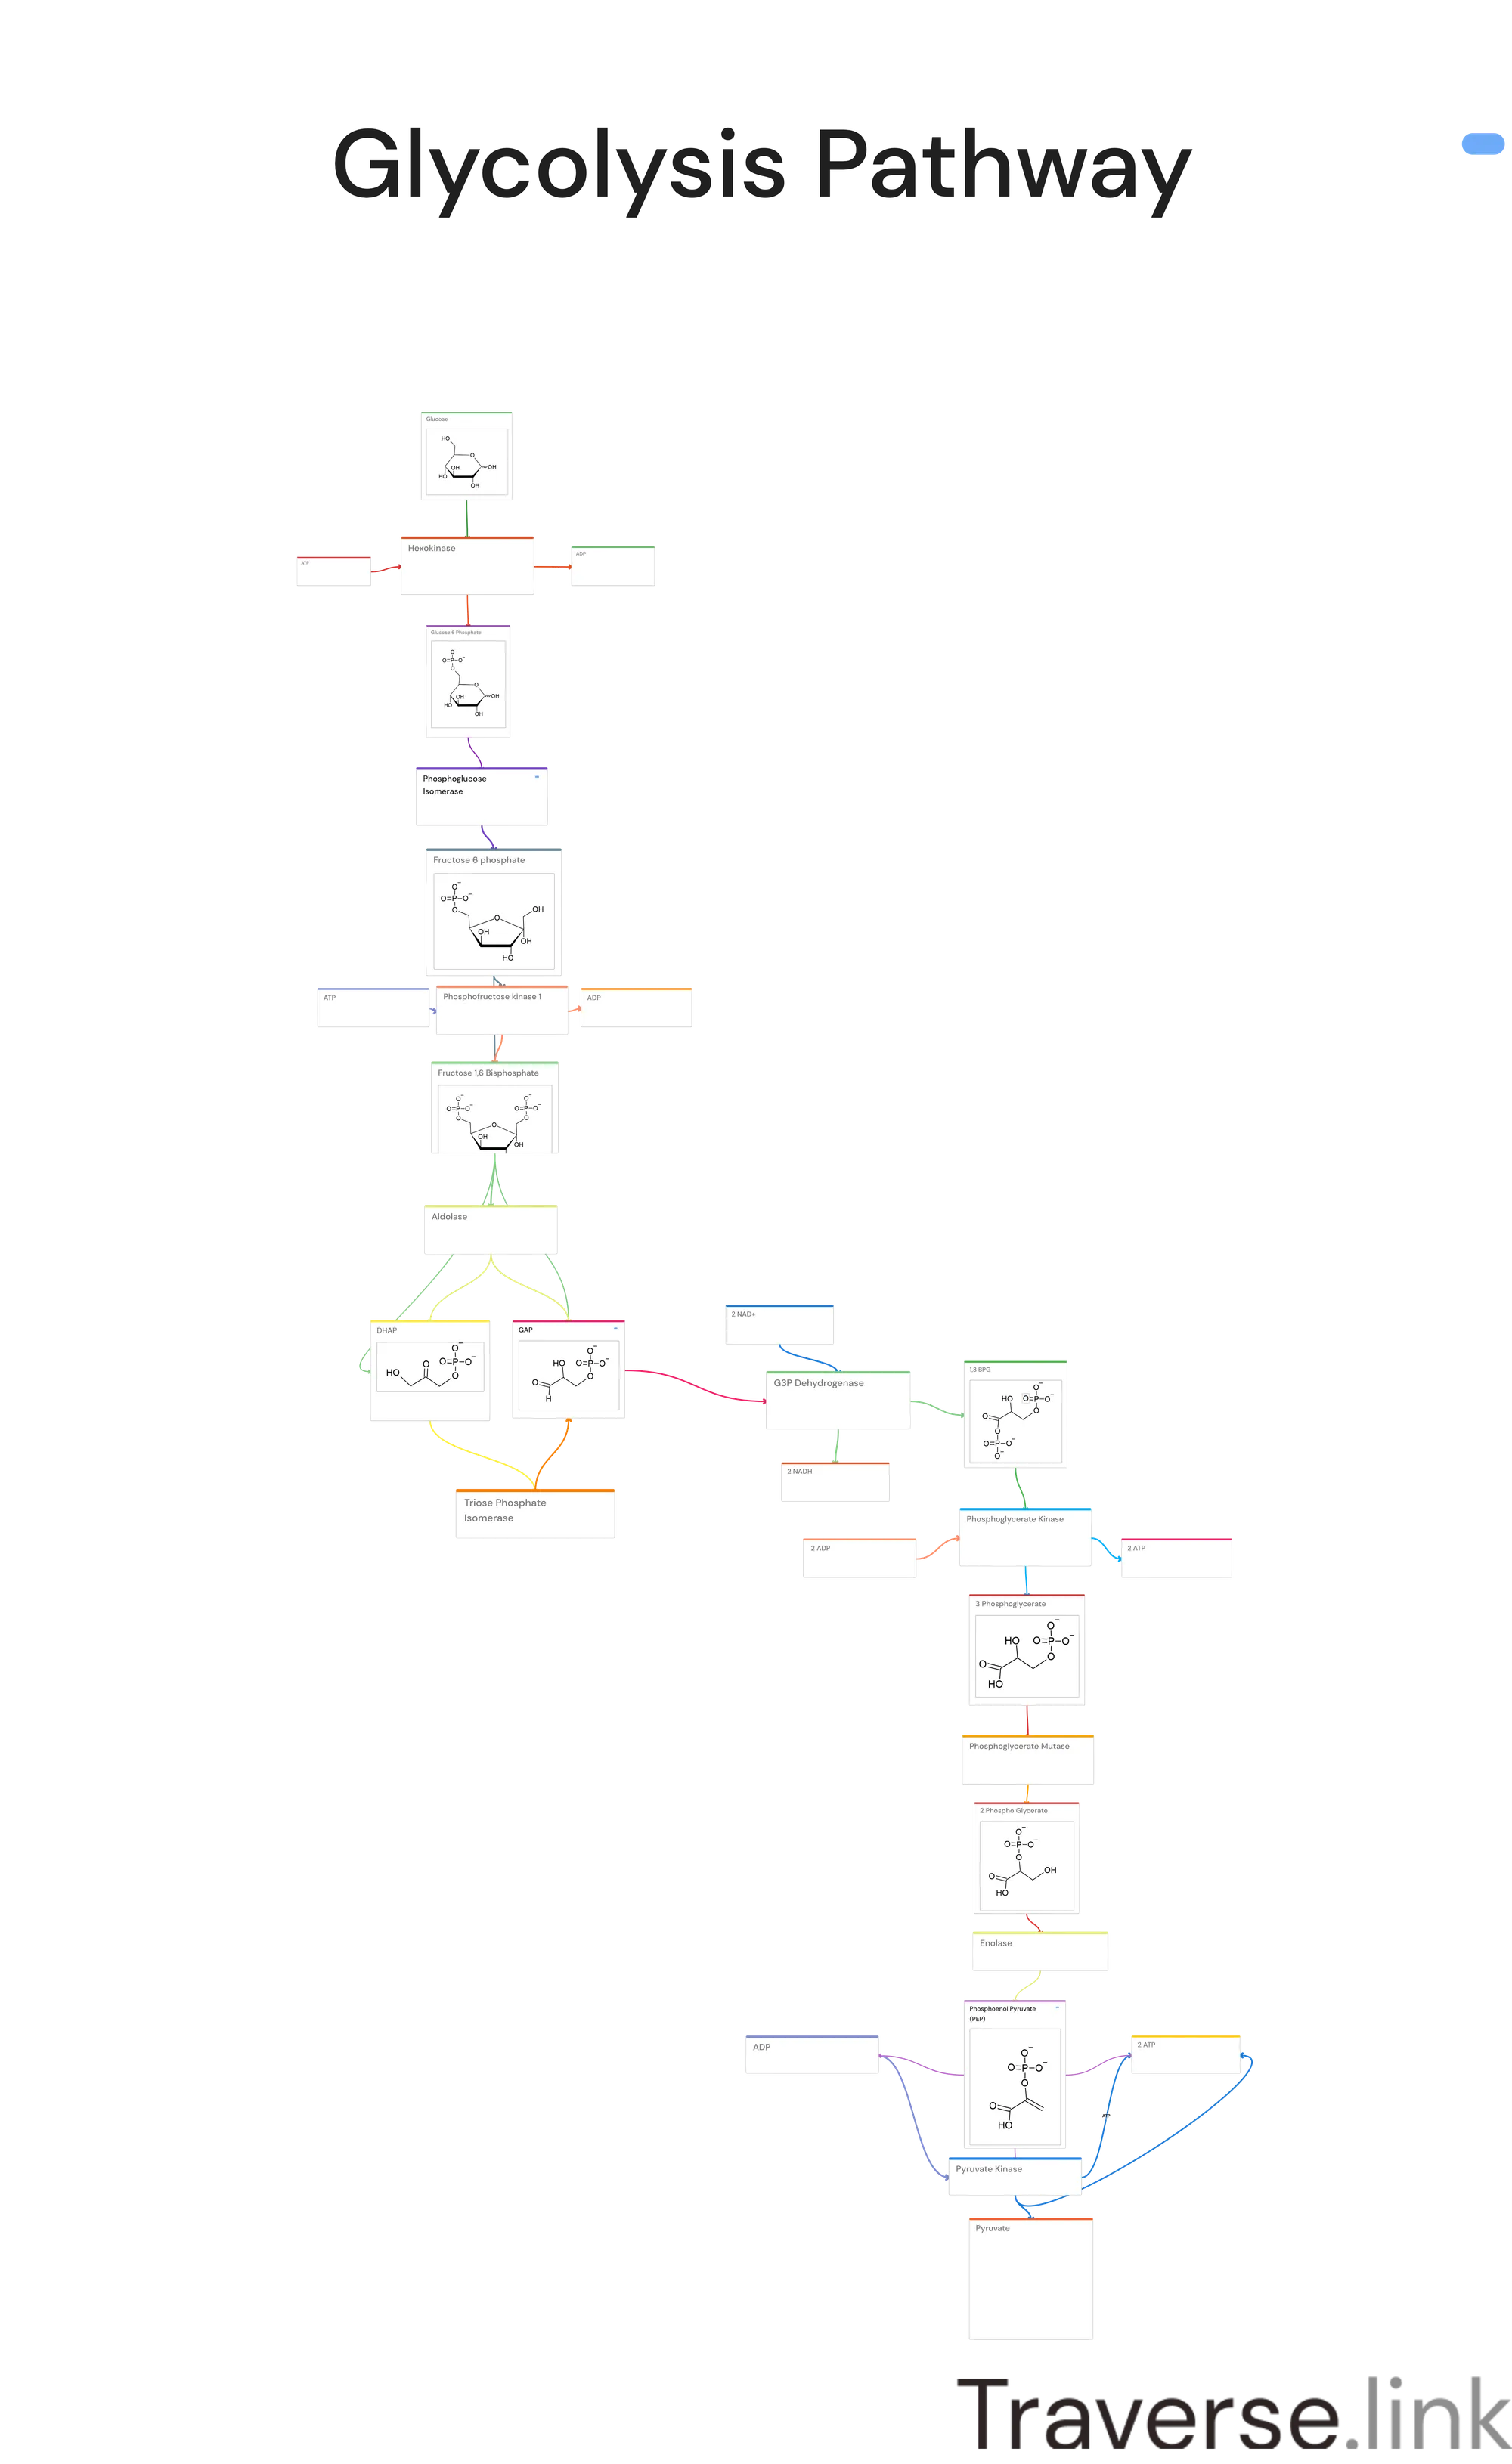 A labeled diagram of the Glycolysis pathway